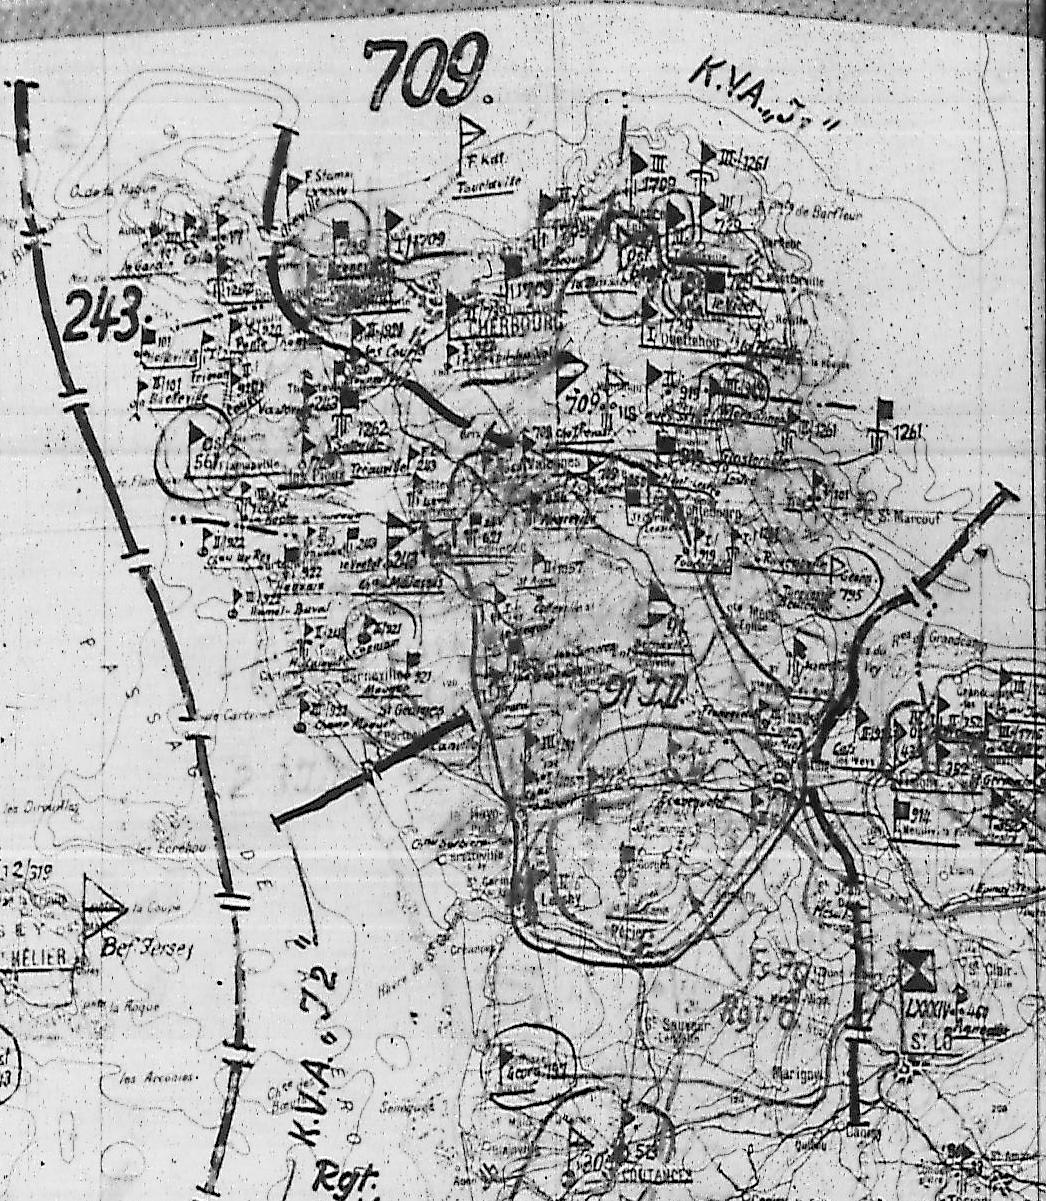 extract from AOK 7 Daily sitmap for 22 May 1944